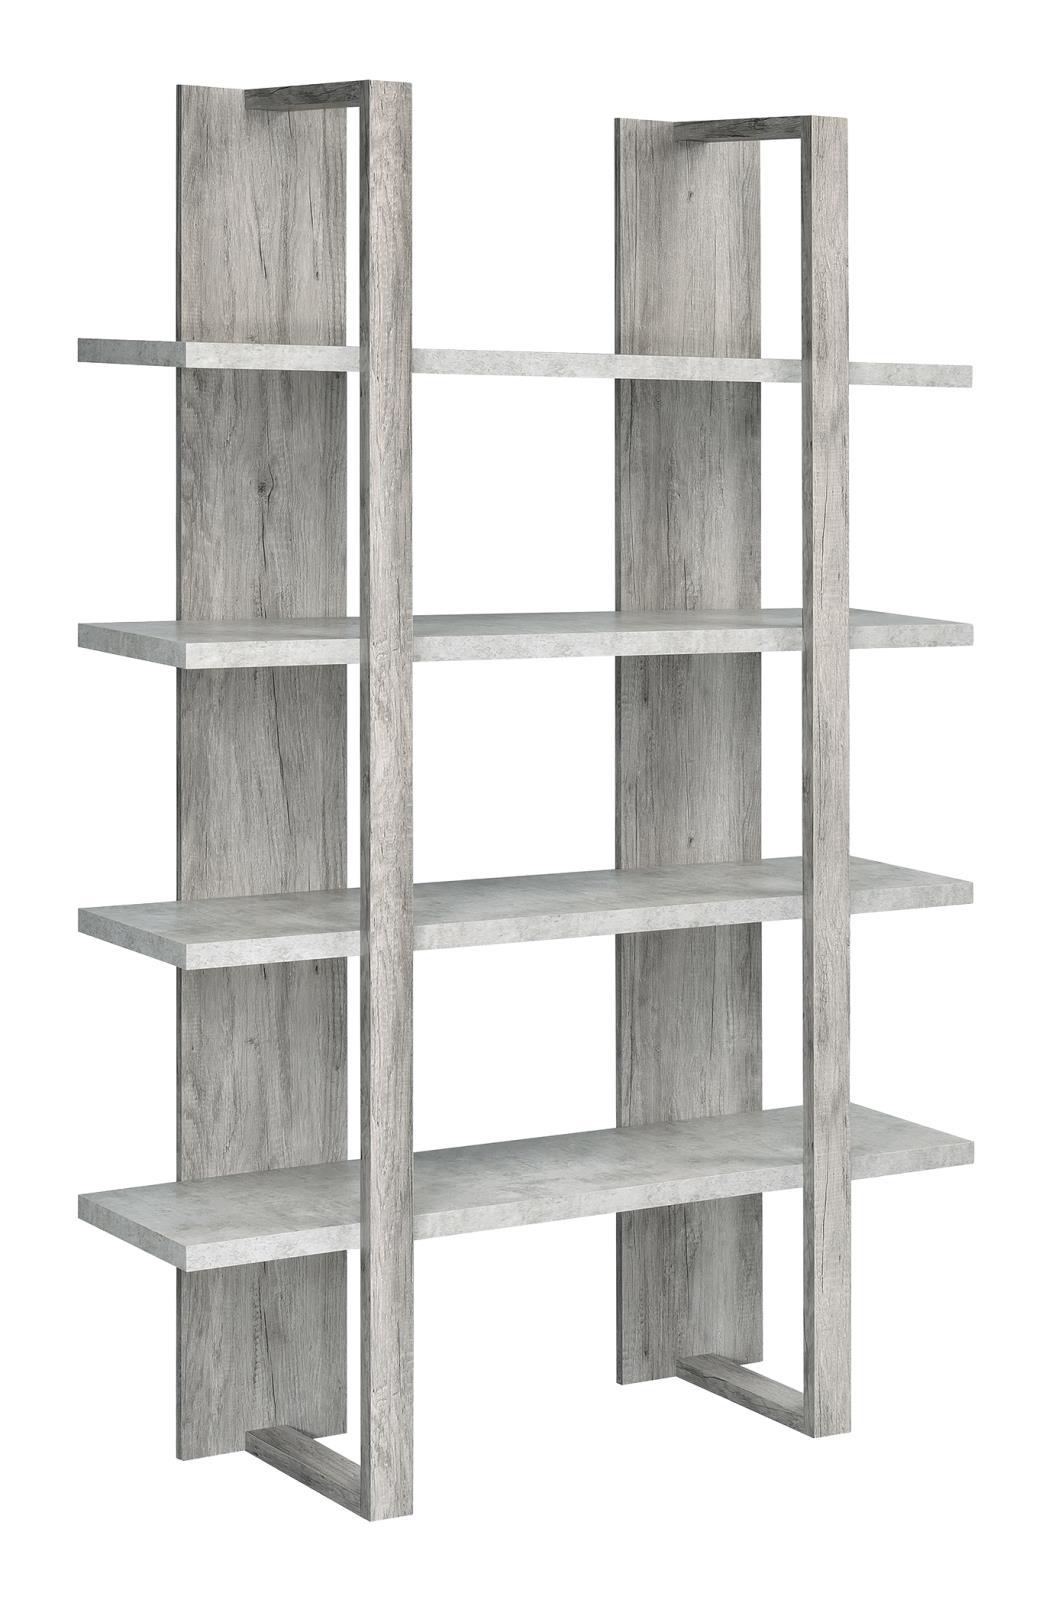 Danbrook Bookcase with 4 Full-length Shelves Danbrook Bookcase with 4 Full-length Shelves Half Price Furniture